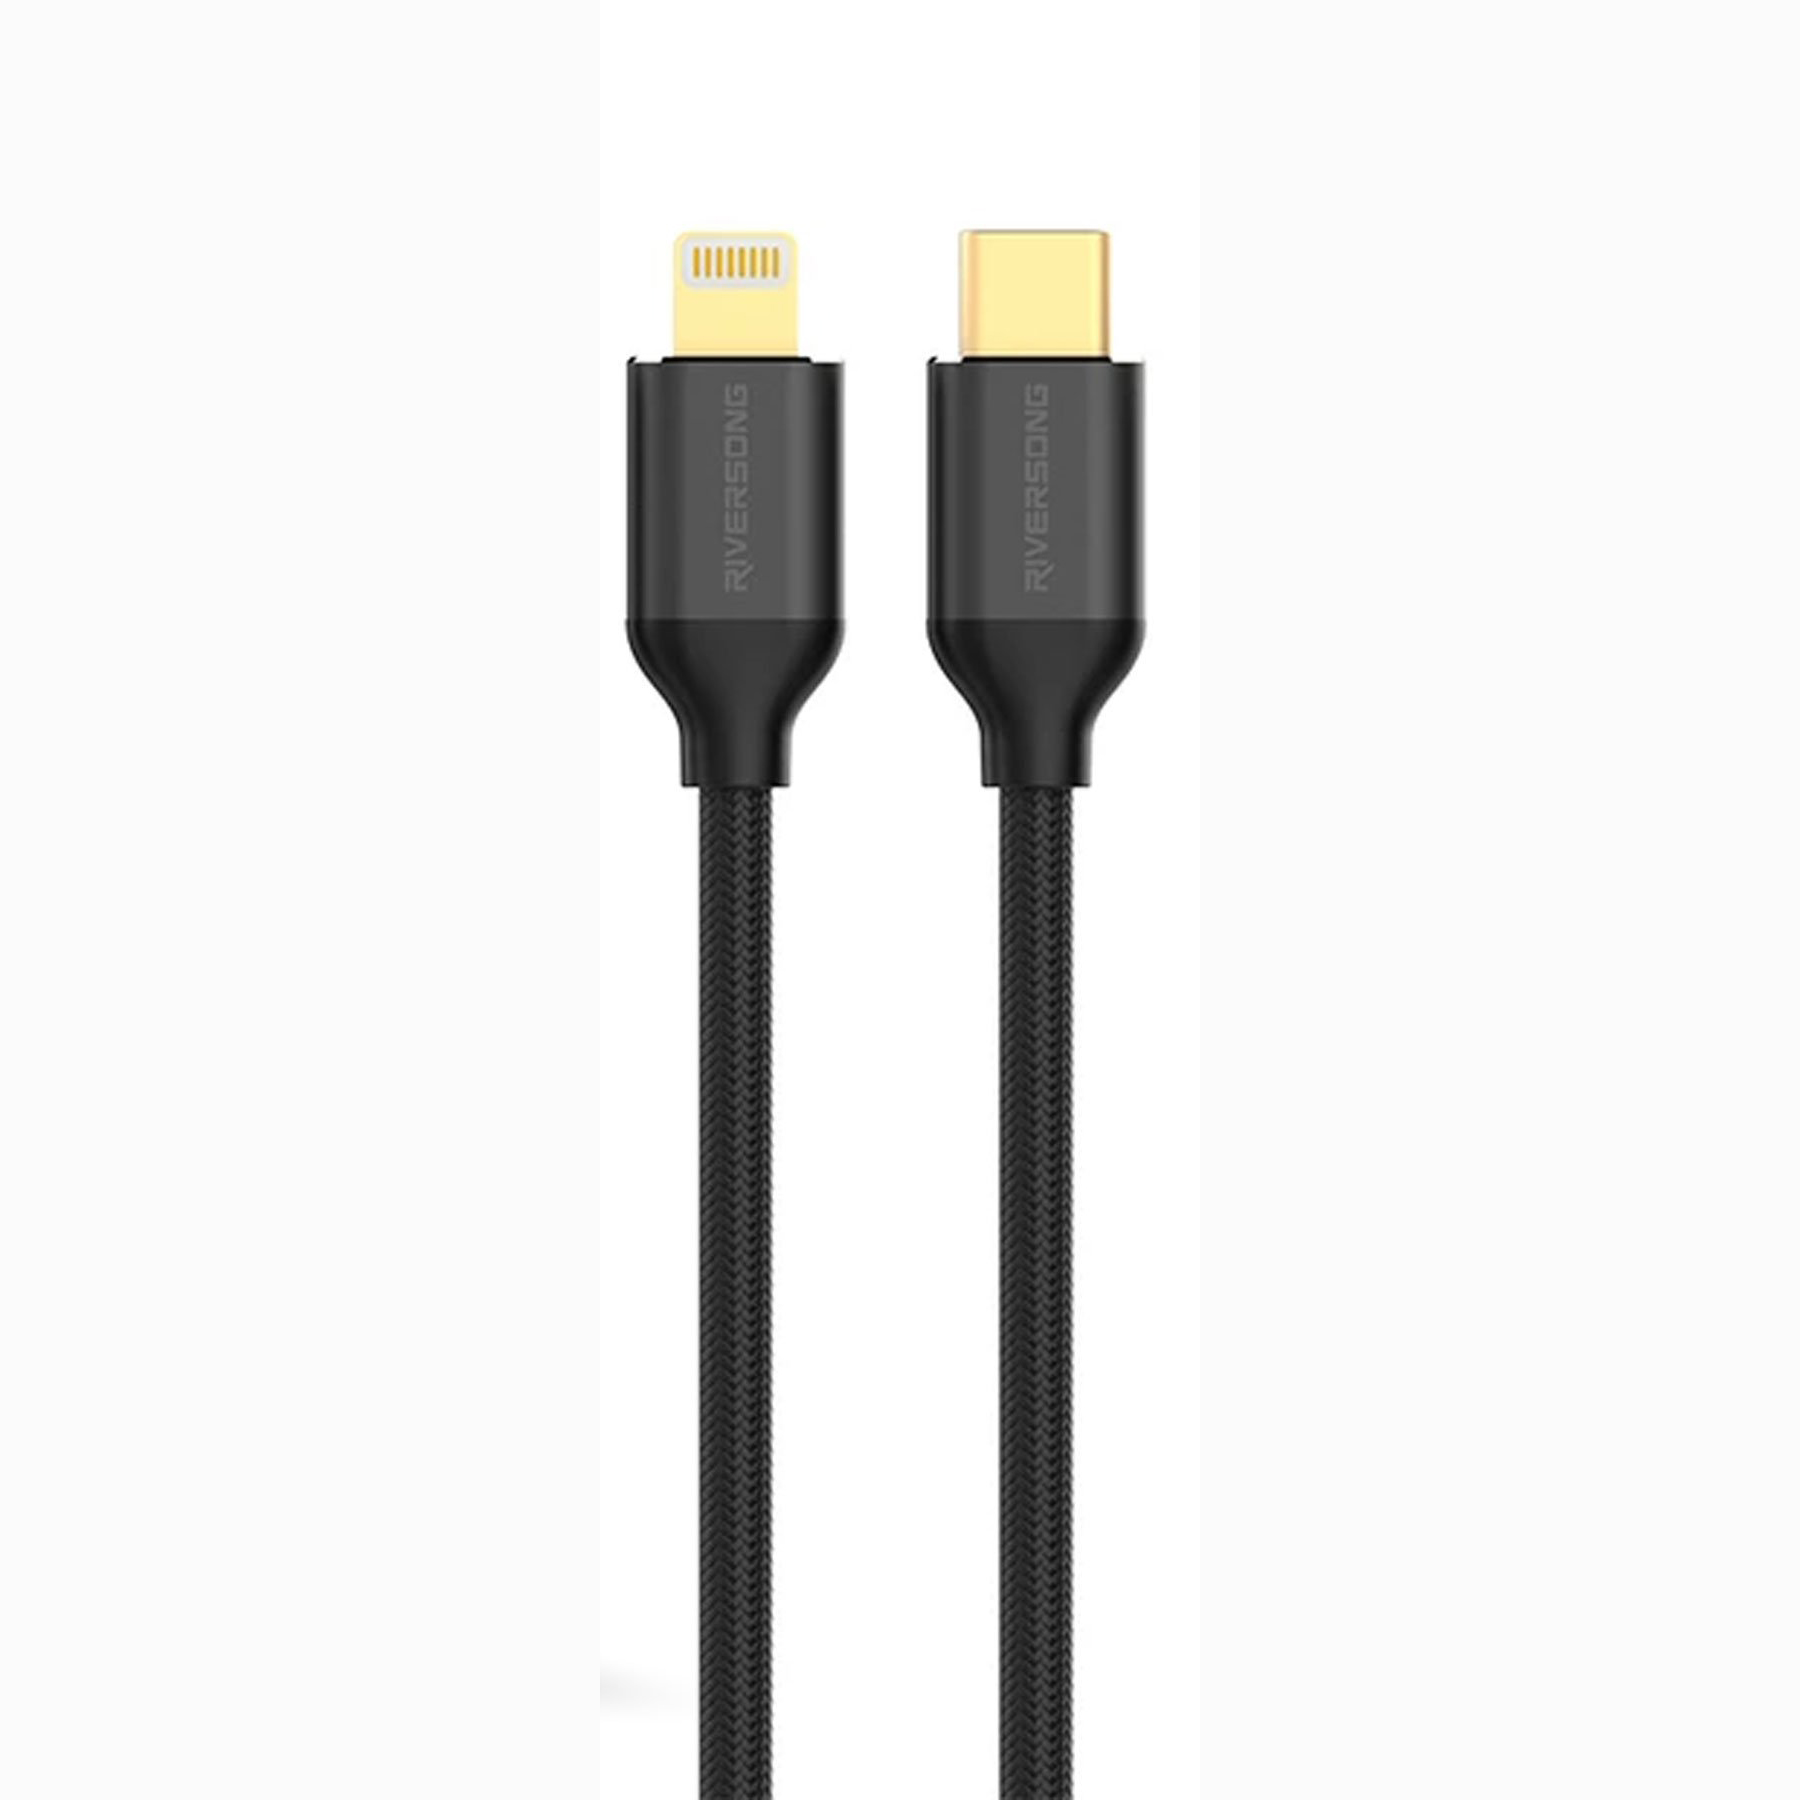 CABLE TYPE-C TO Lightning FOR IPHONE & IPAD DATA & CHARGE RIVERSONG 2.4A CL47 تايب سي الى ايفون ,Other Smartphone Acc